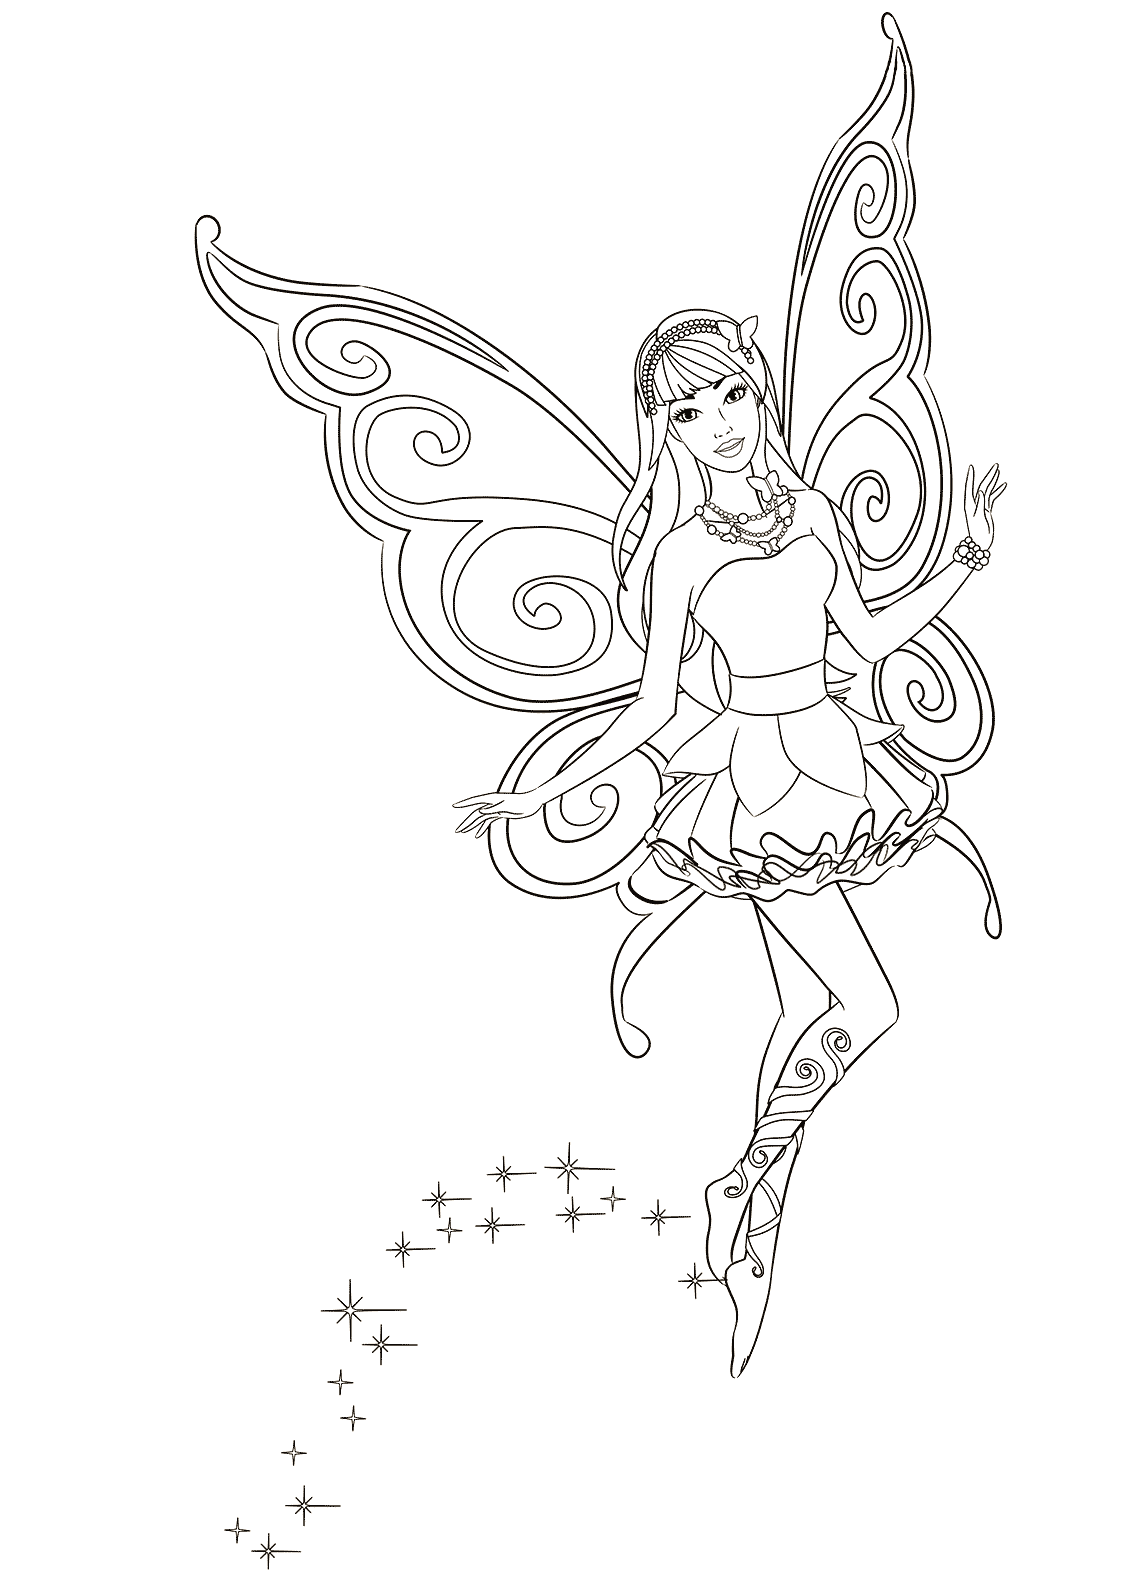 Download Coloring page - Fairy loves to fly